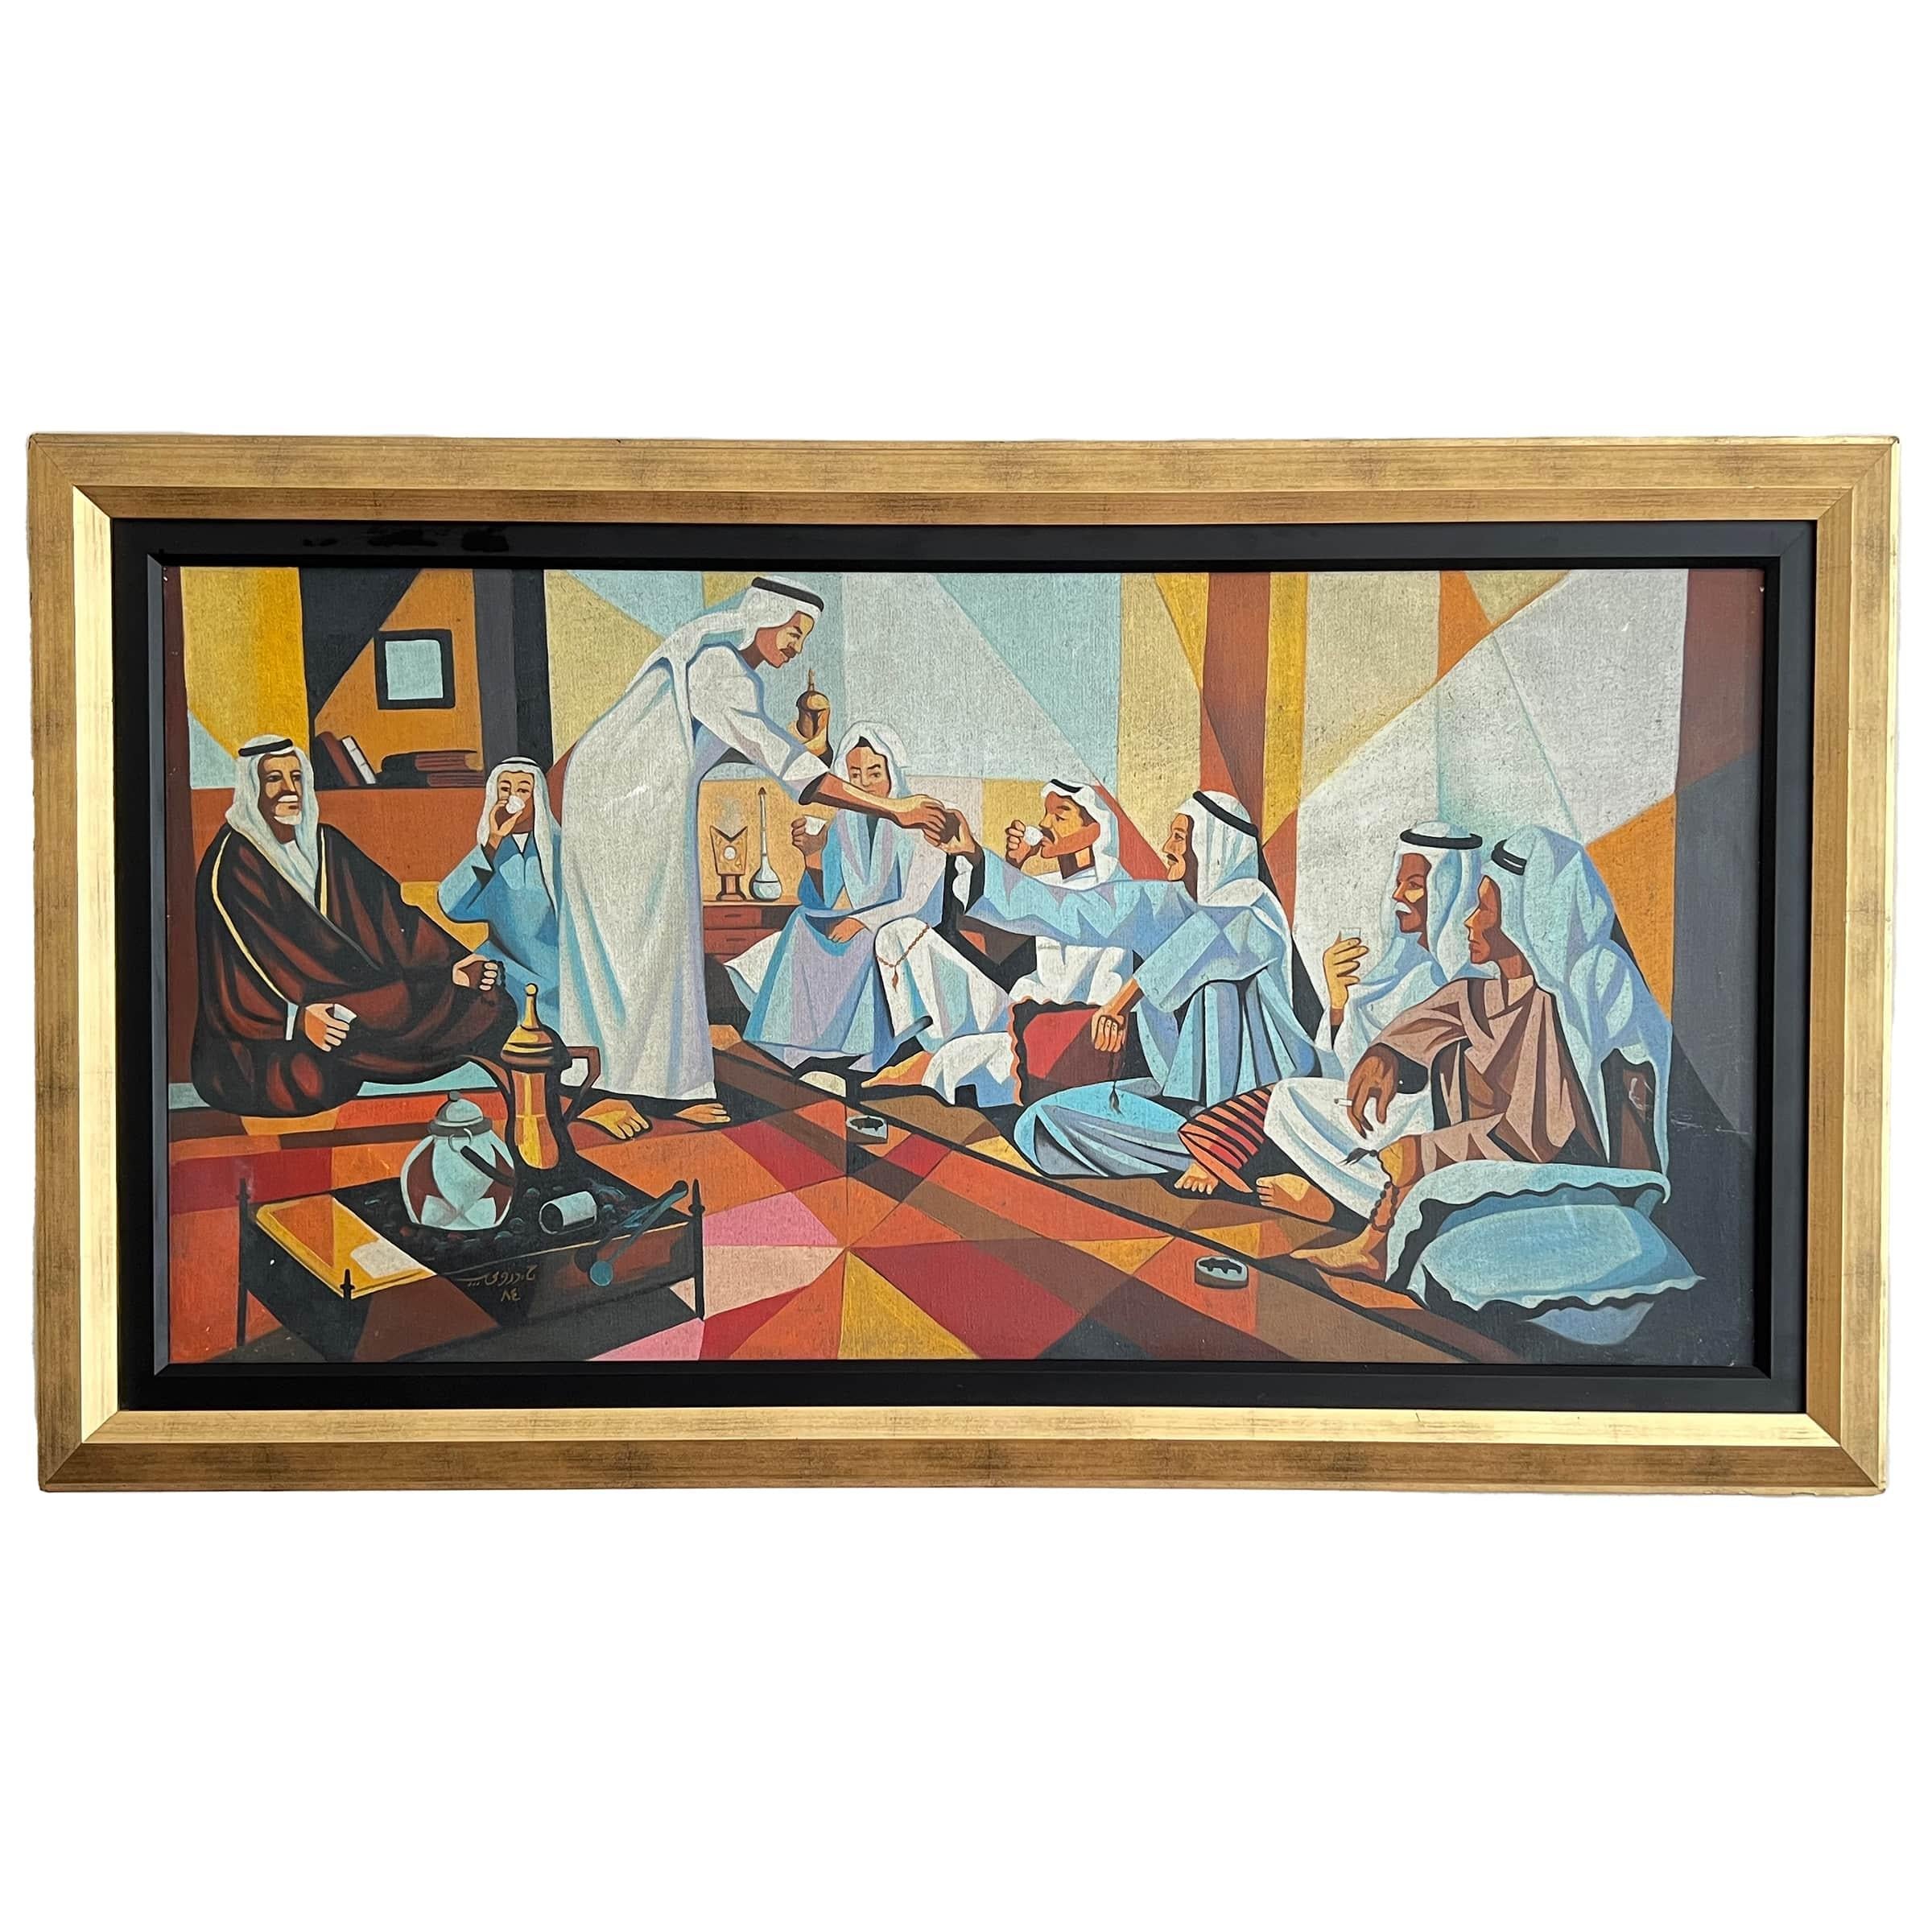 This oil on canvas painting by the Iraqi pioneer artist Hafidh Aldroubi captures the essence of a traditional Arabic majlis. Seven seated men engage in conversation while an eighth figure gracefully serves coffee from a dallah, embodying the